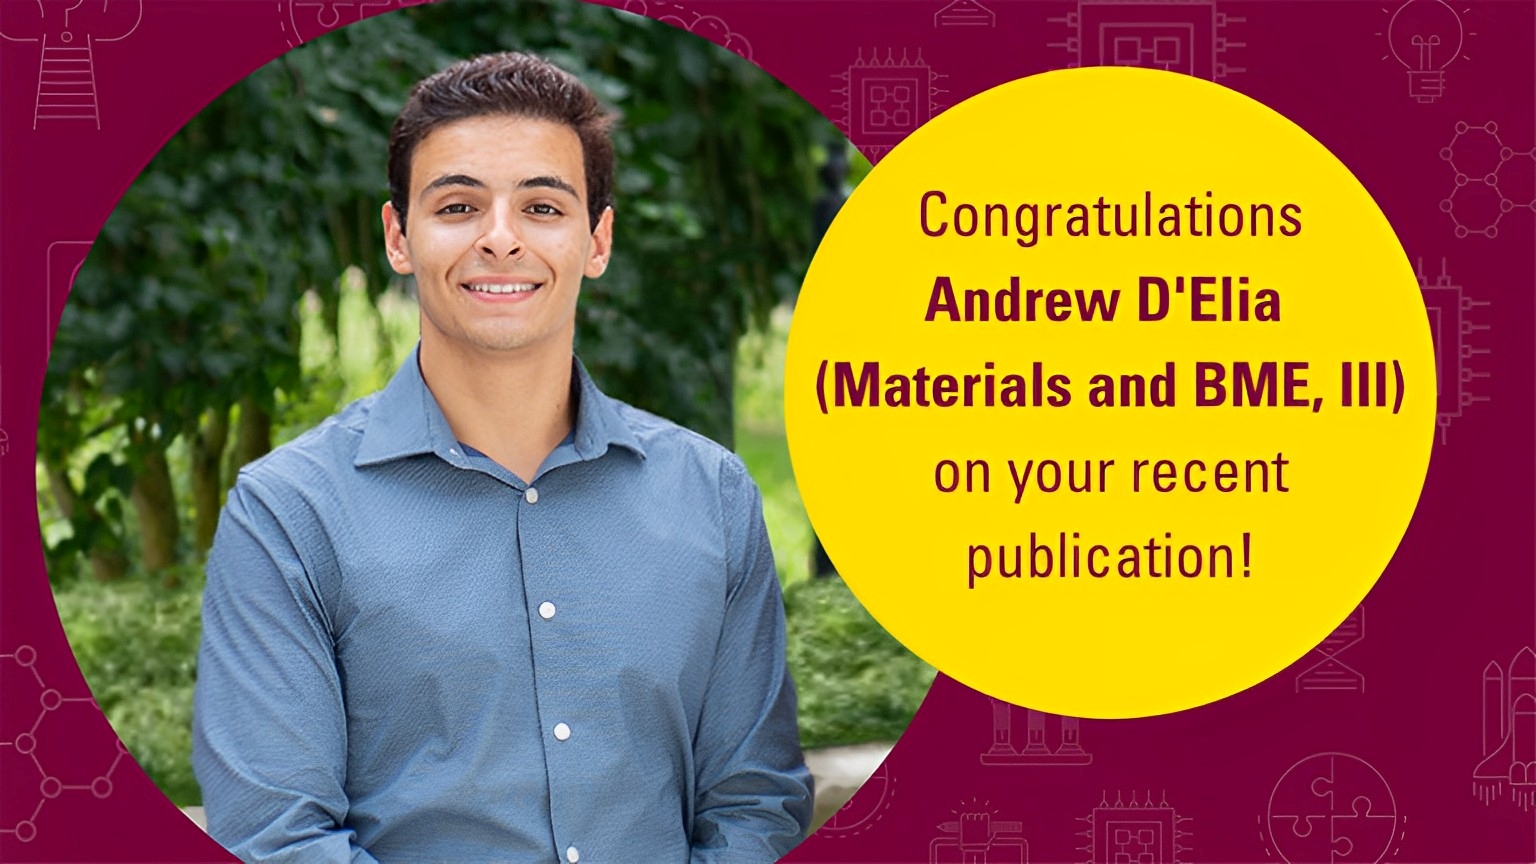 Andrew D'Elia smiling. Text says congrats on your recent publication.